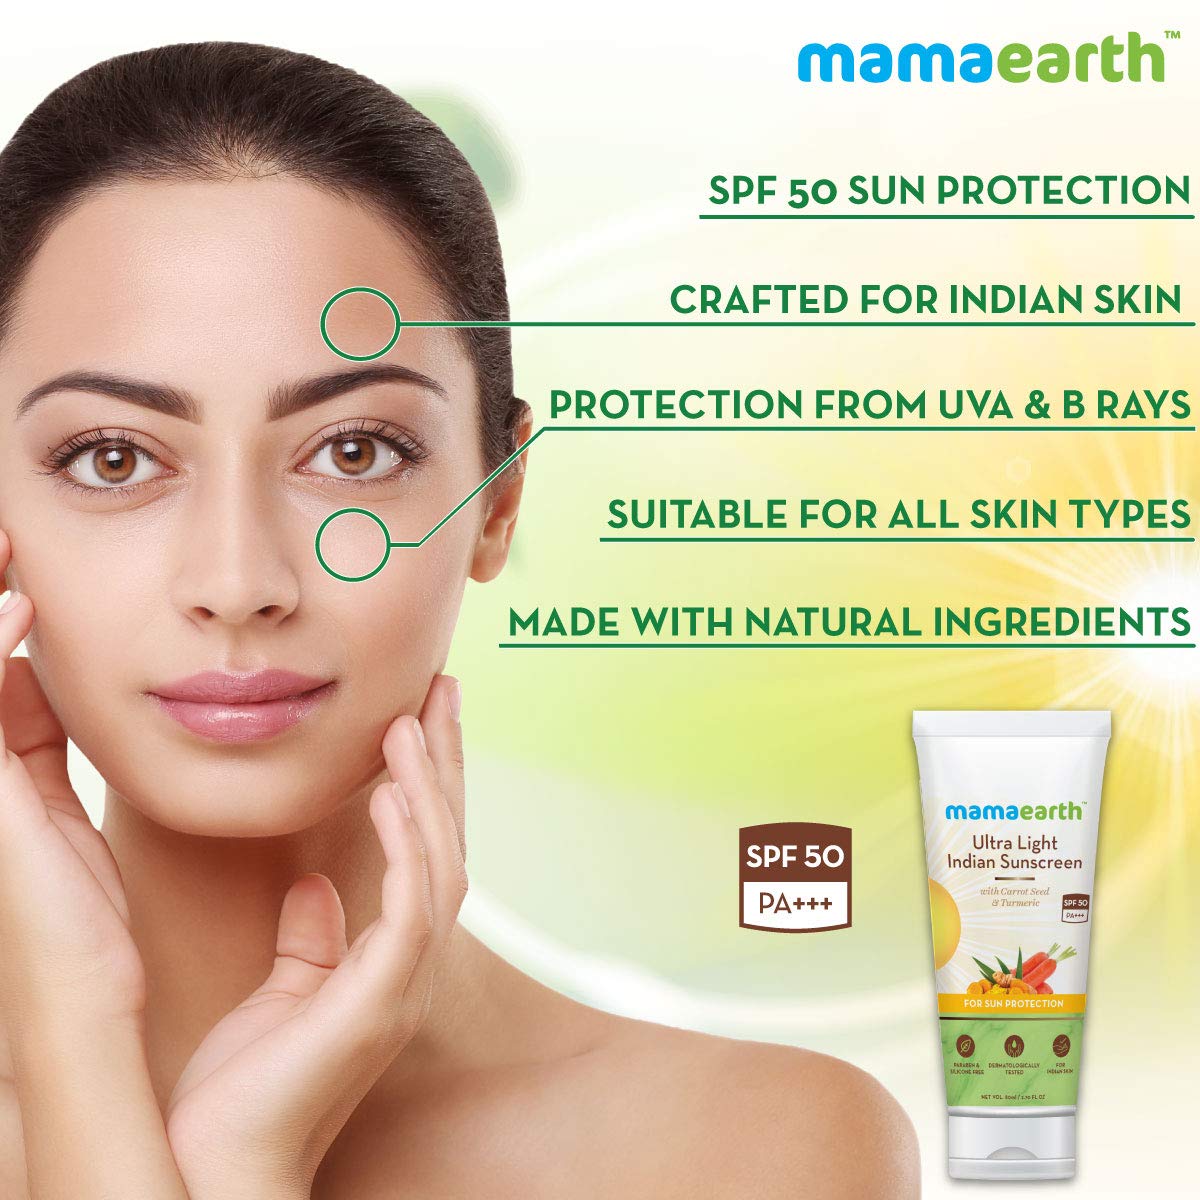 Mamaearth Ultra Light Indian Sunscreen with Carrot Seed, Turmeric and SPF 50 PA+++ - 80g